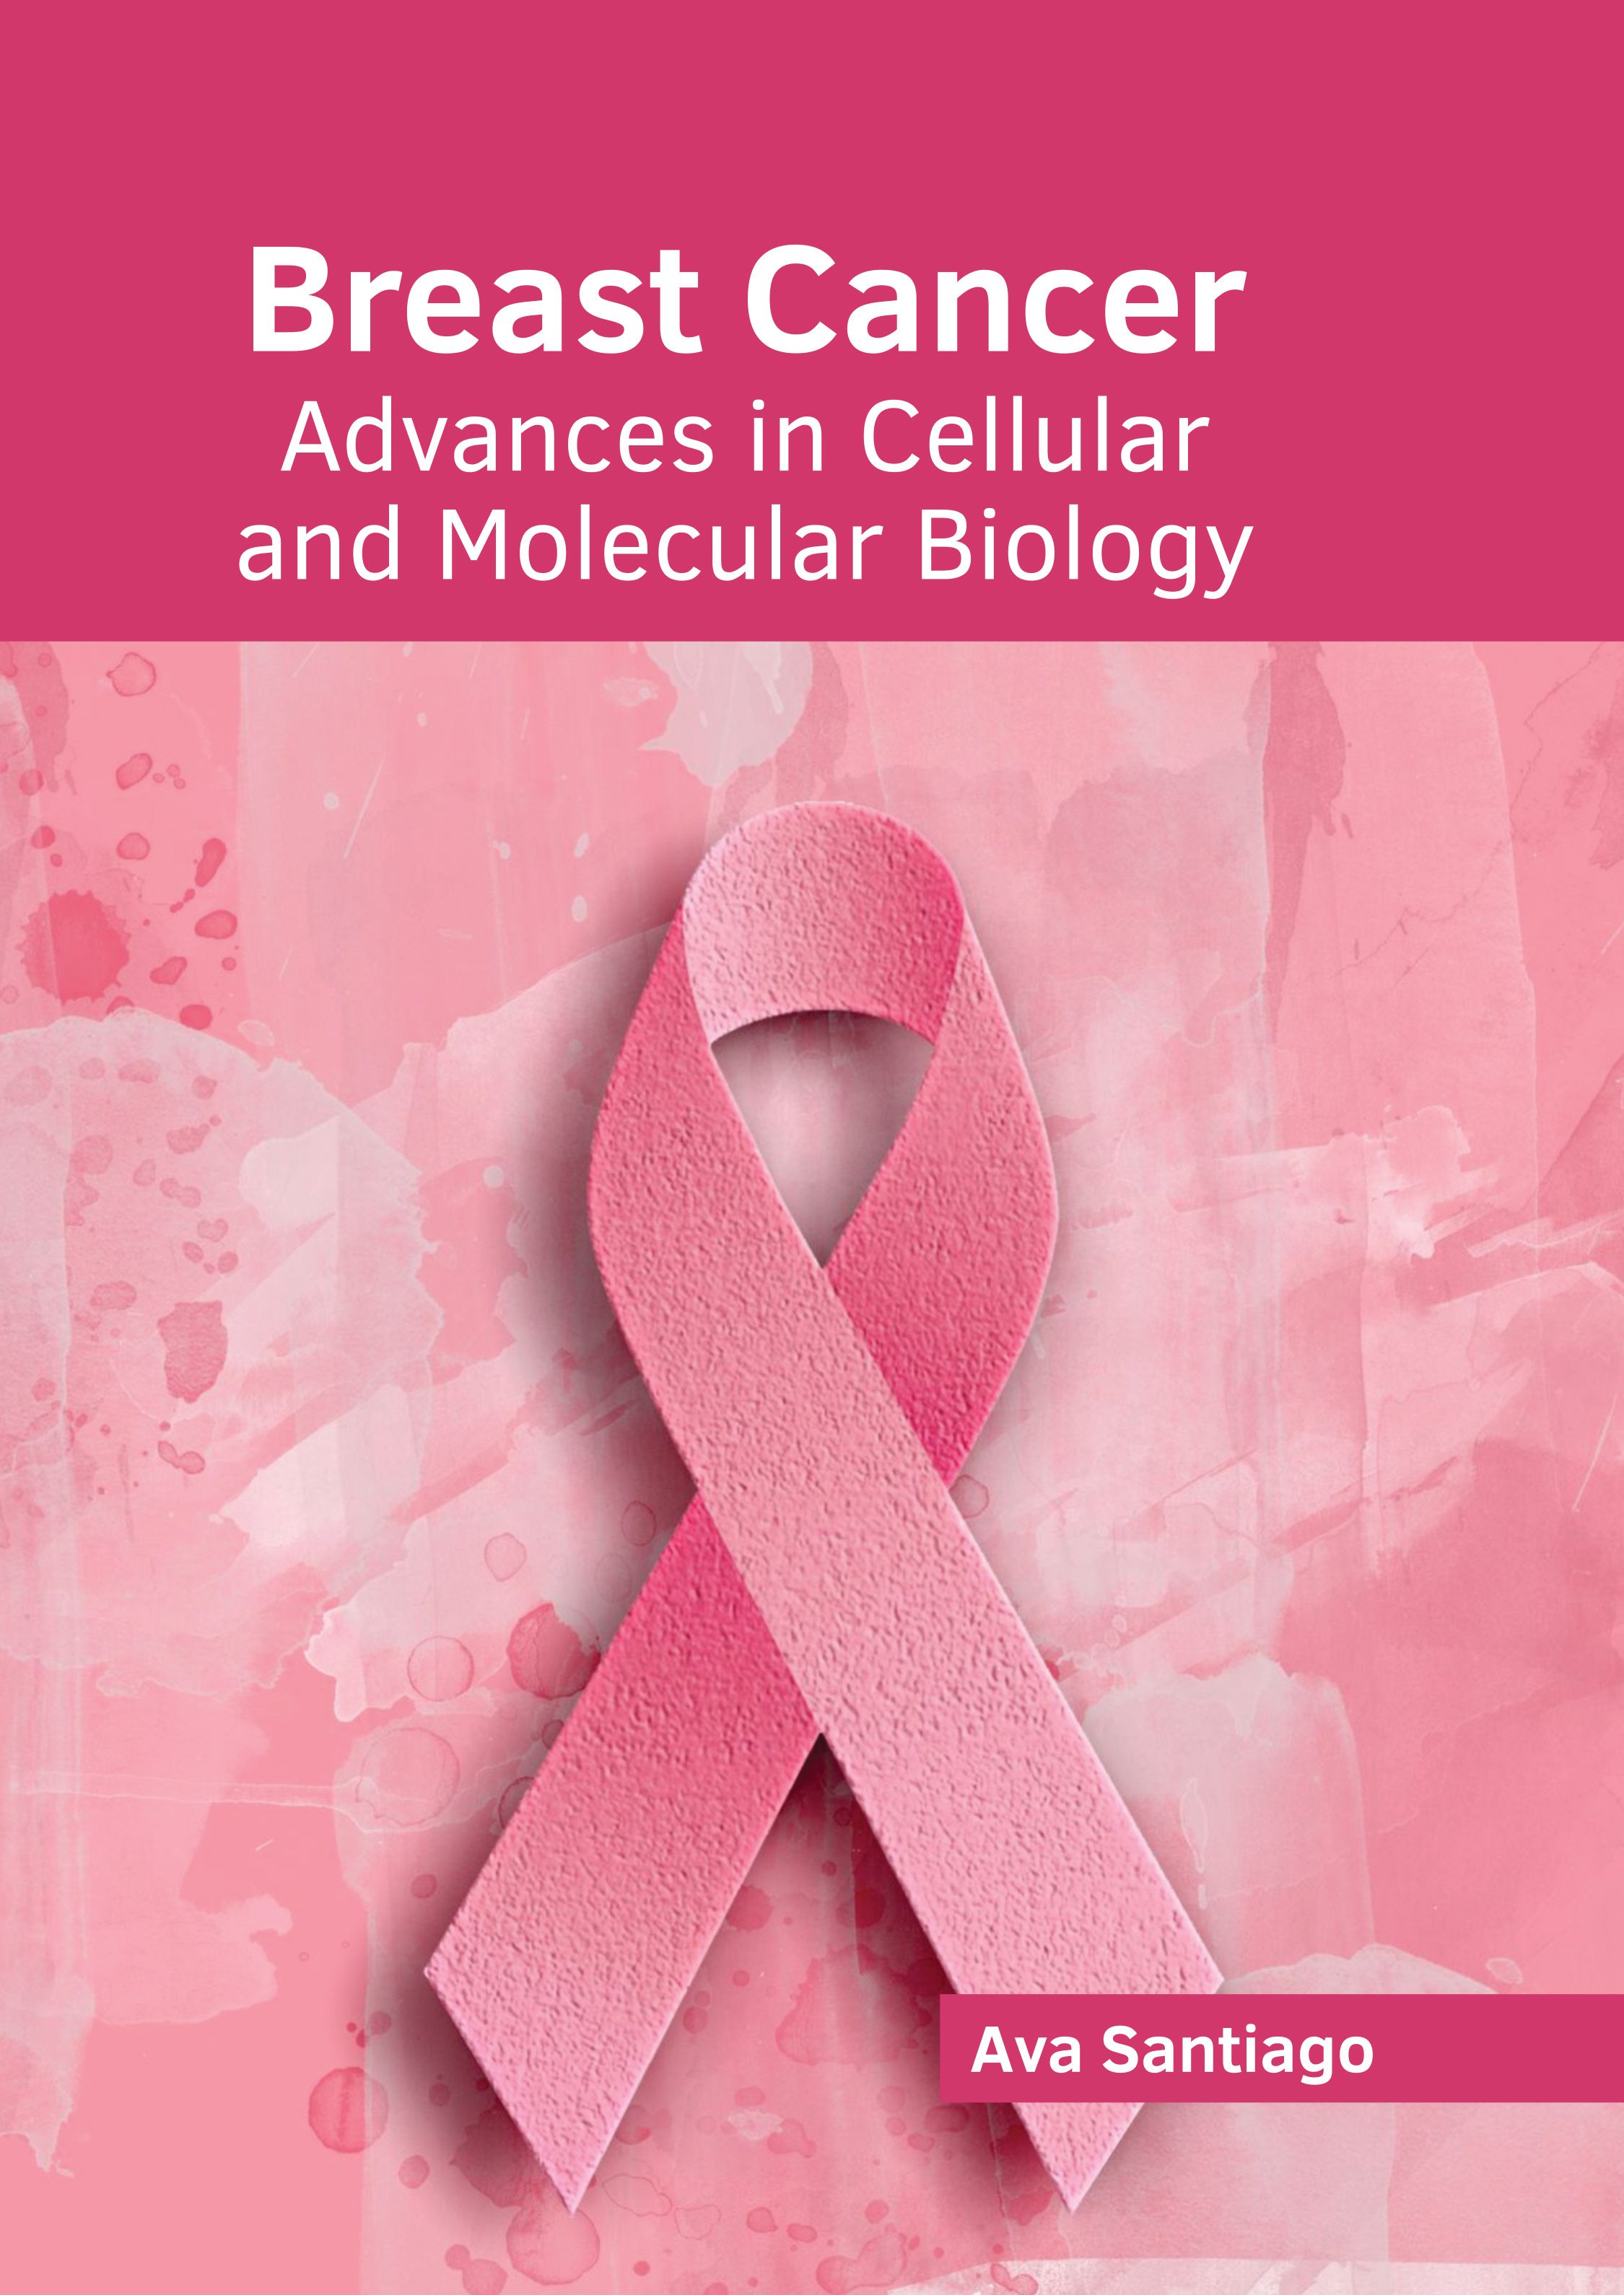 BREAST CANCER: ADVANCES IN CELLULAR AND MOLECULAR BIOLOGY